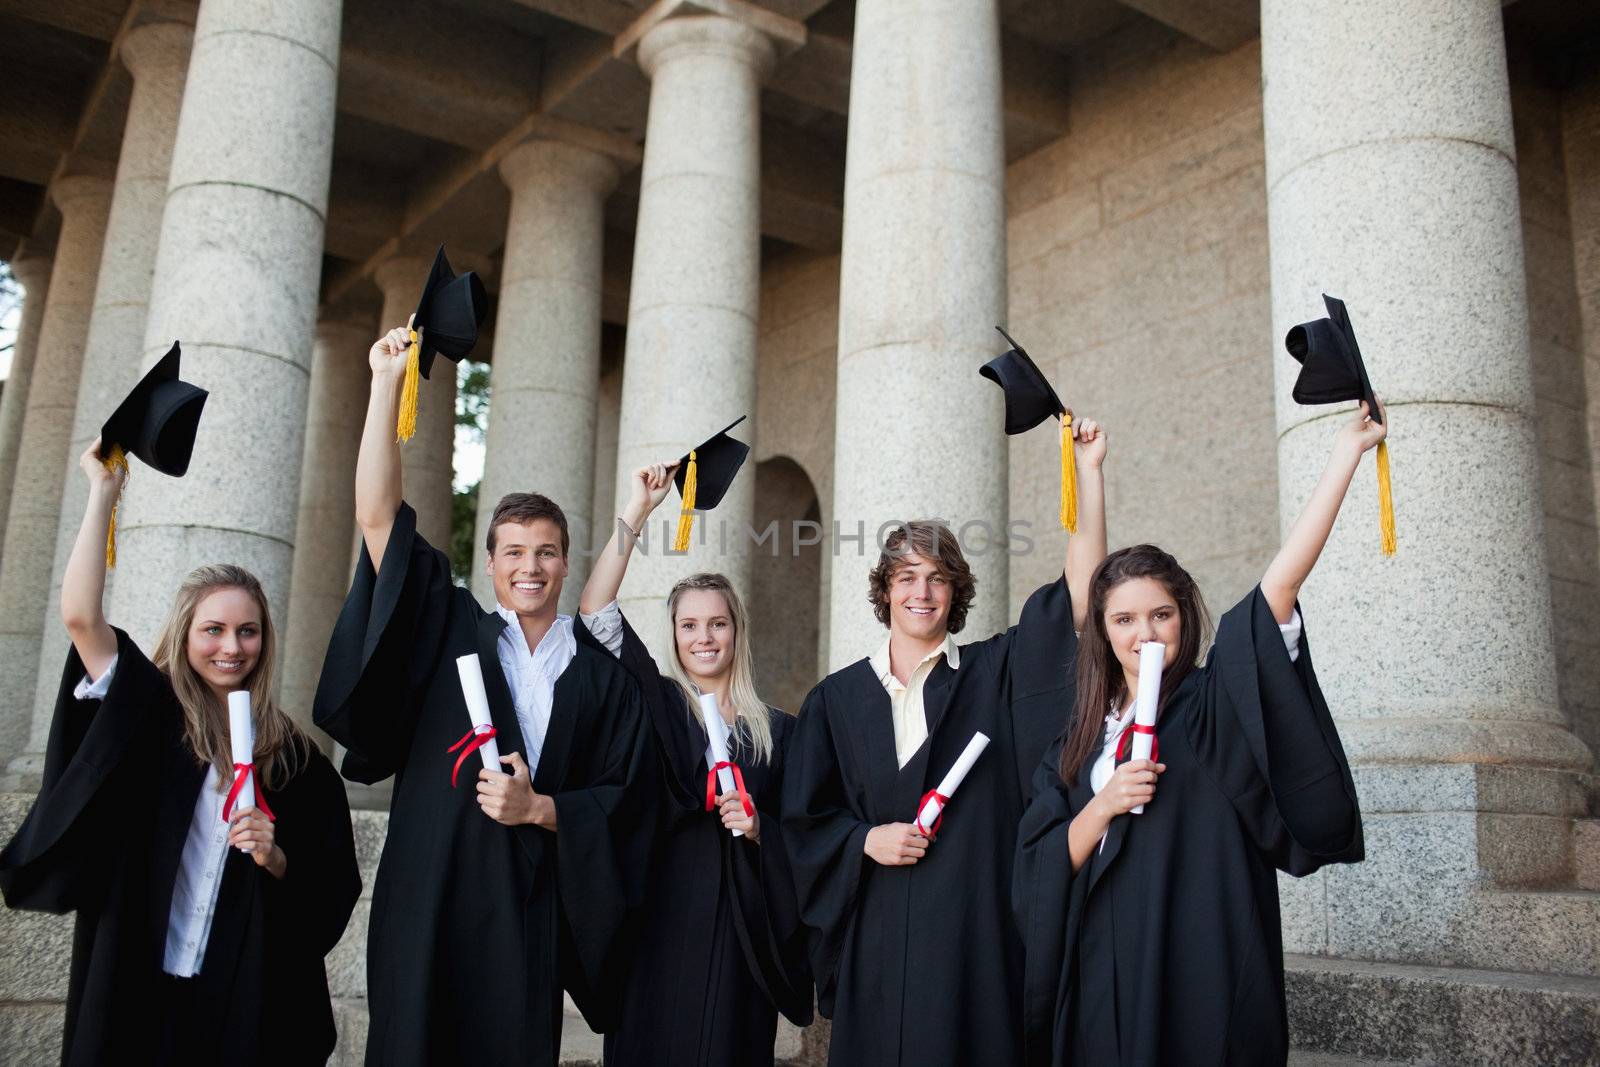 Graduates holding up their hats by Wavebreakmedia